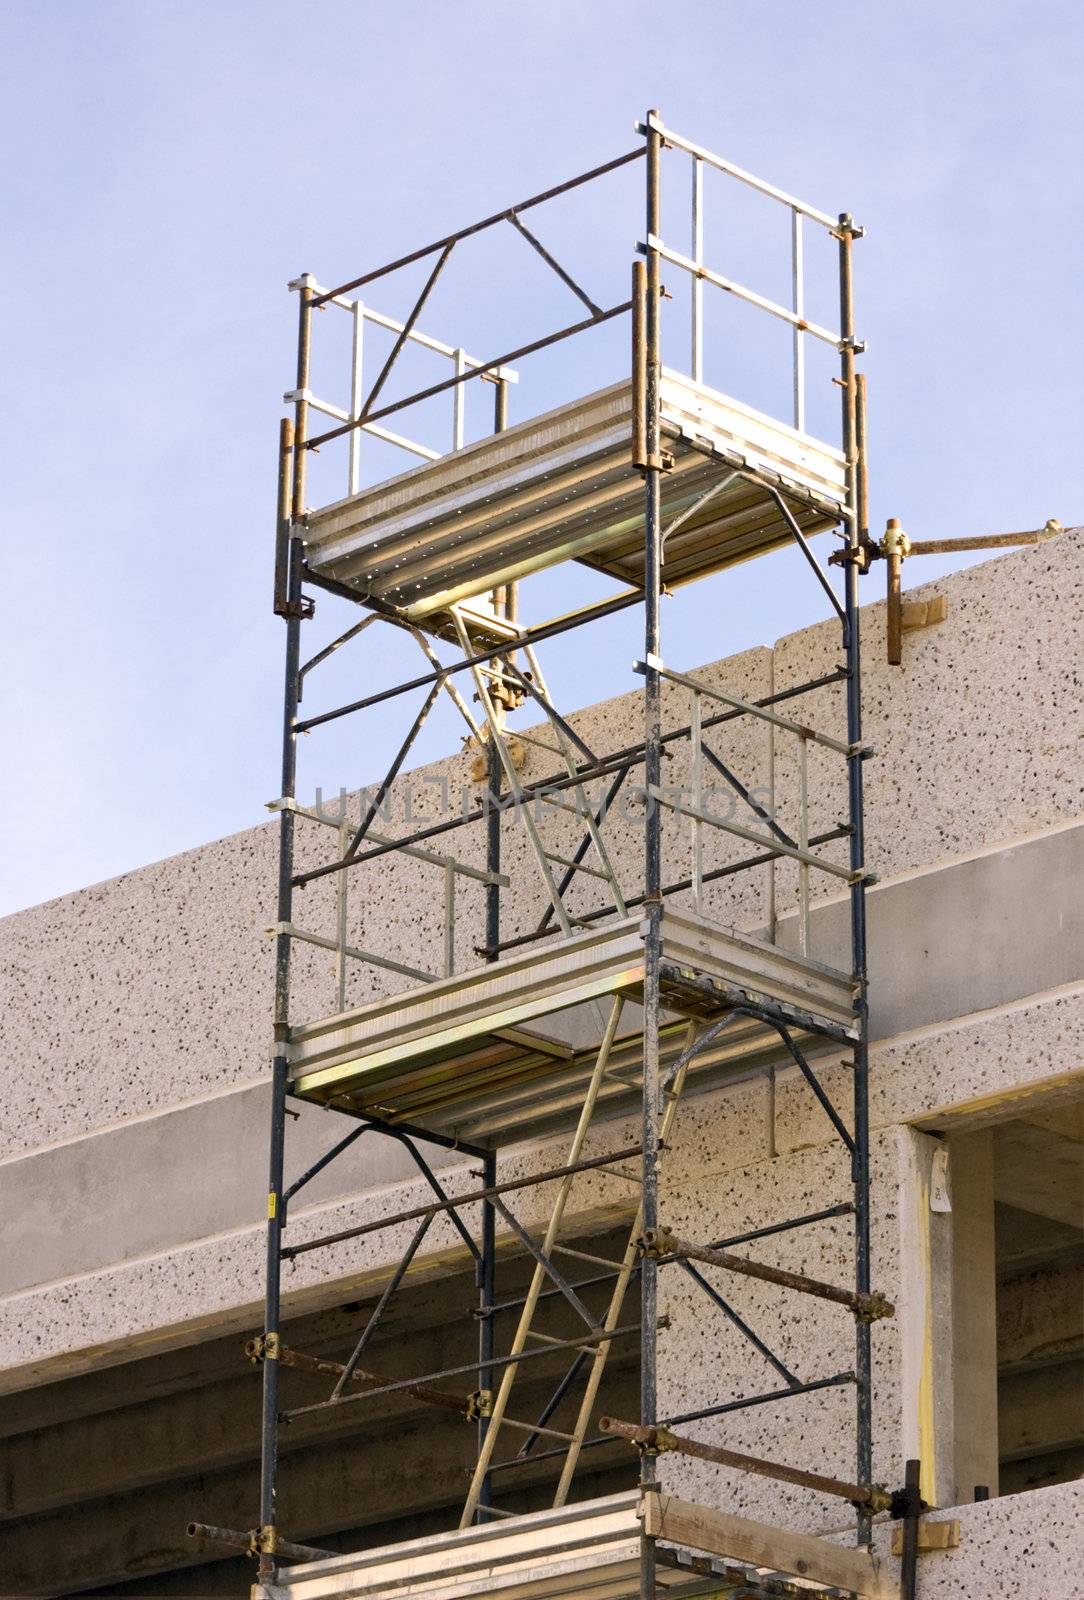 Scaffolding in a building site